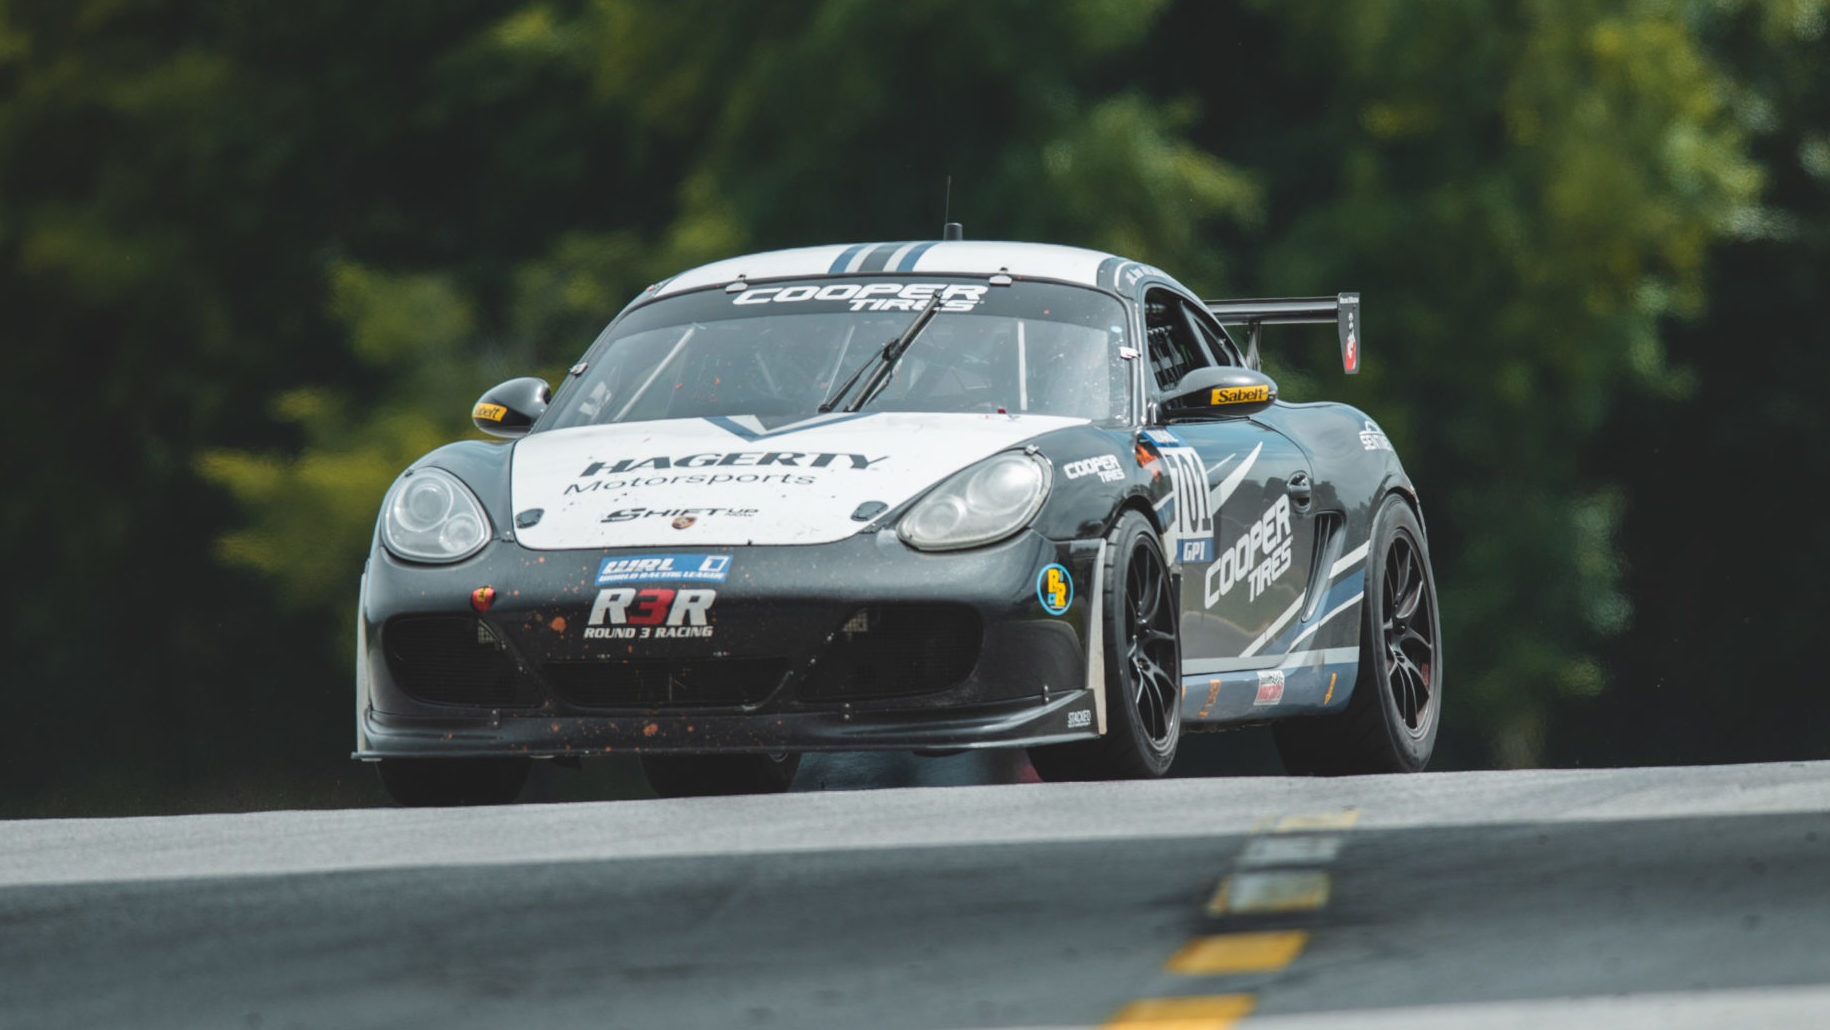 Ayla Agren to Race at VIR with Round 3 Racing